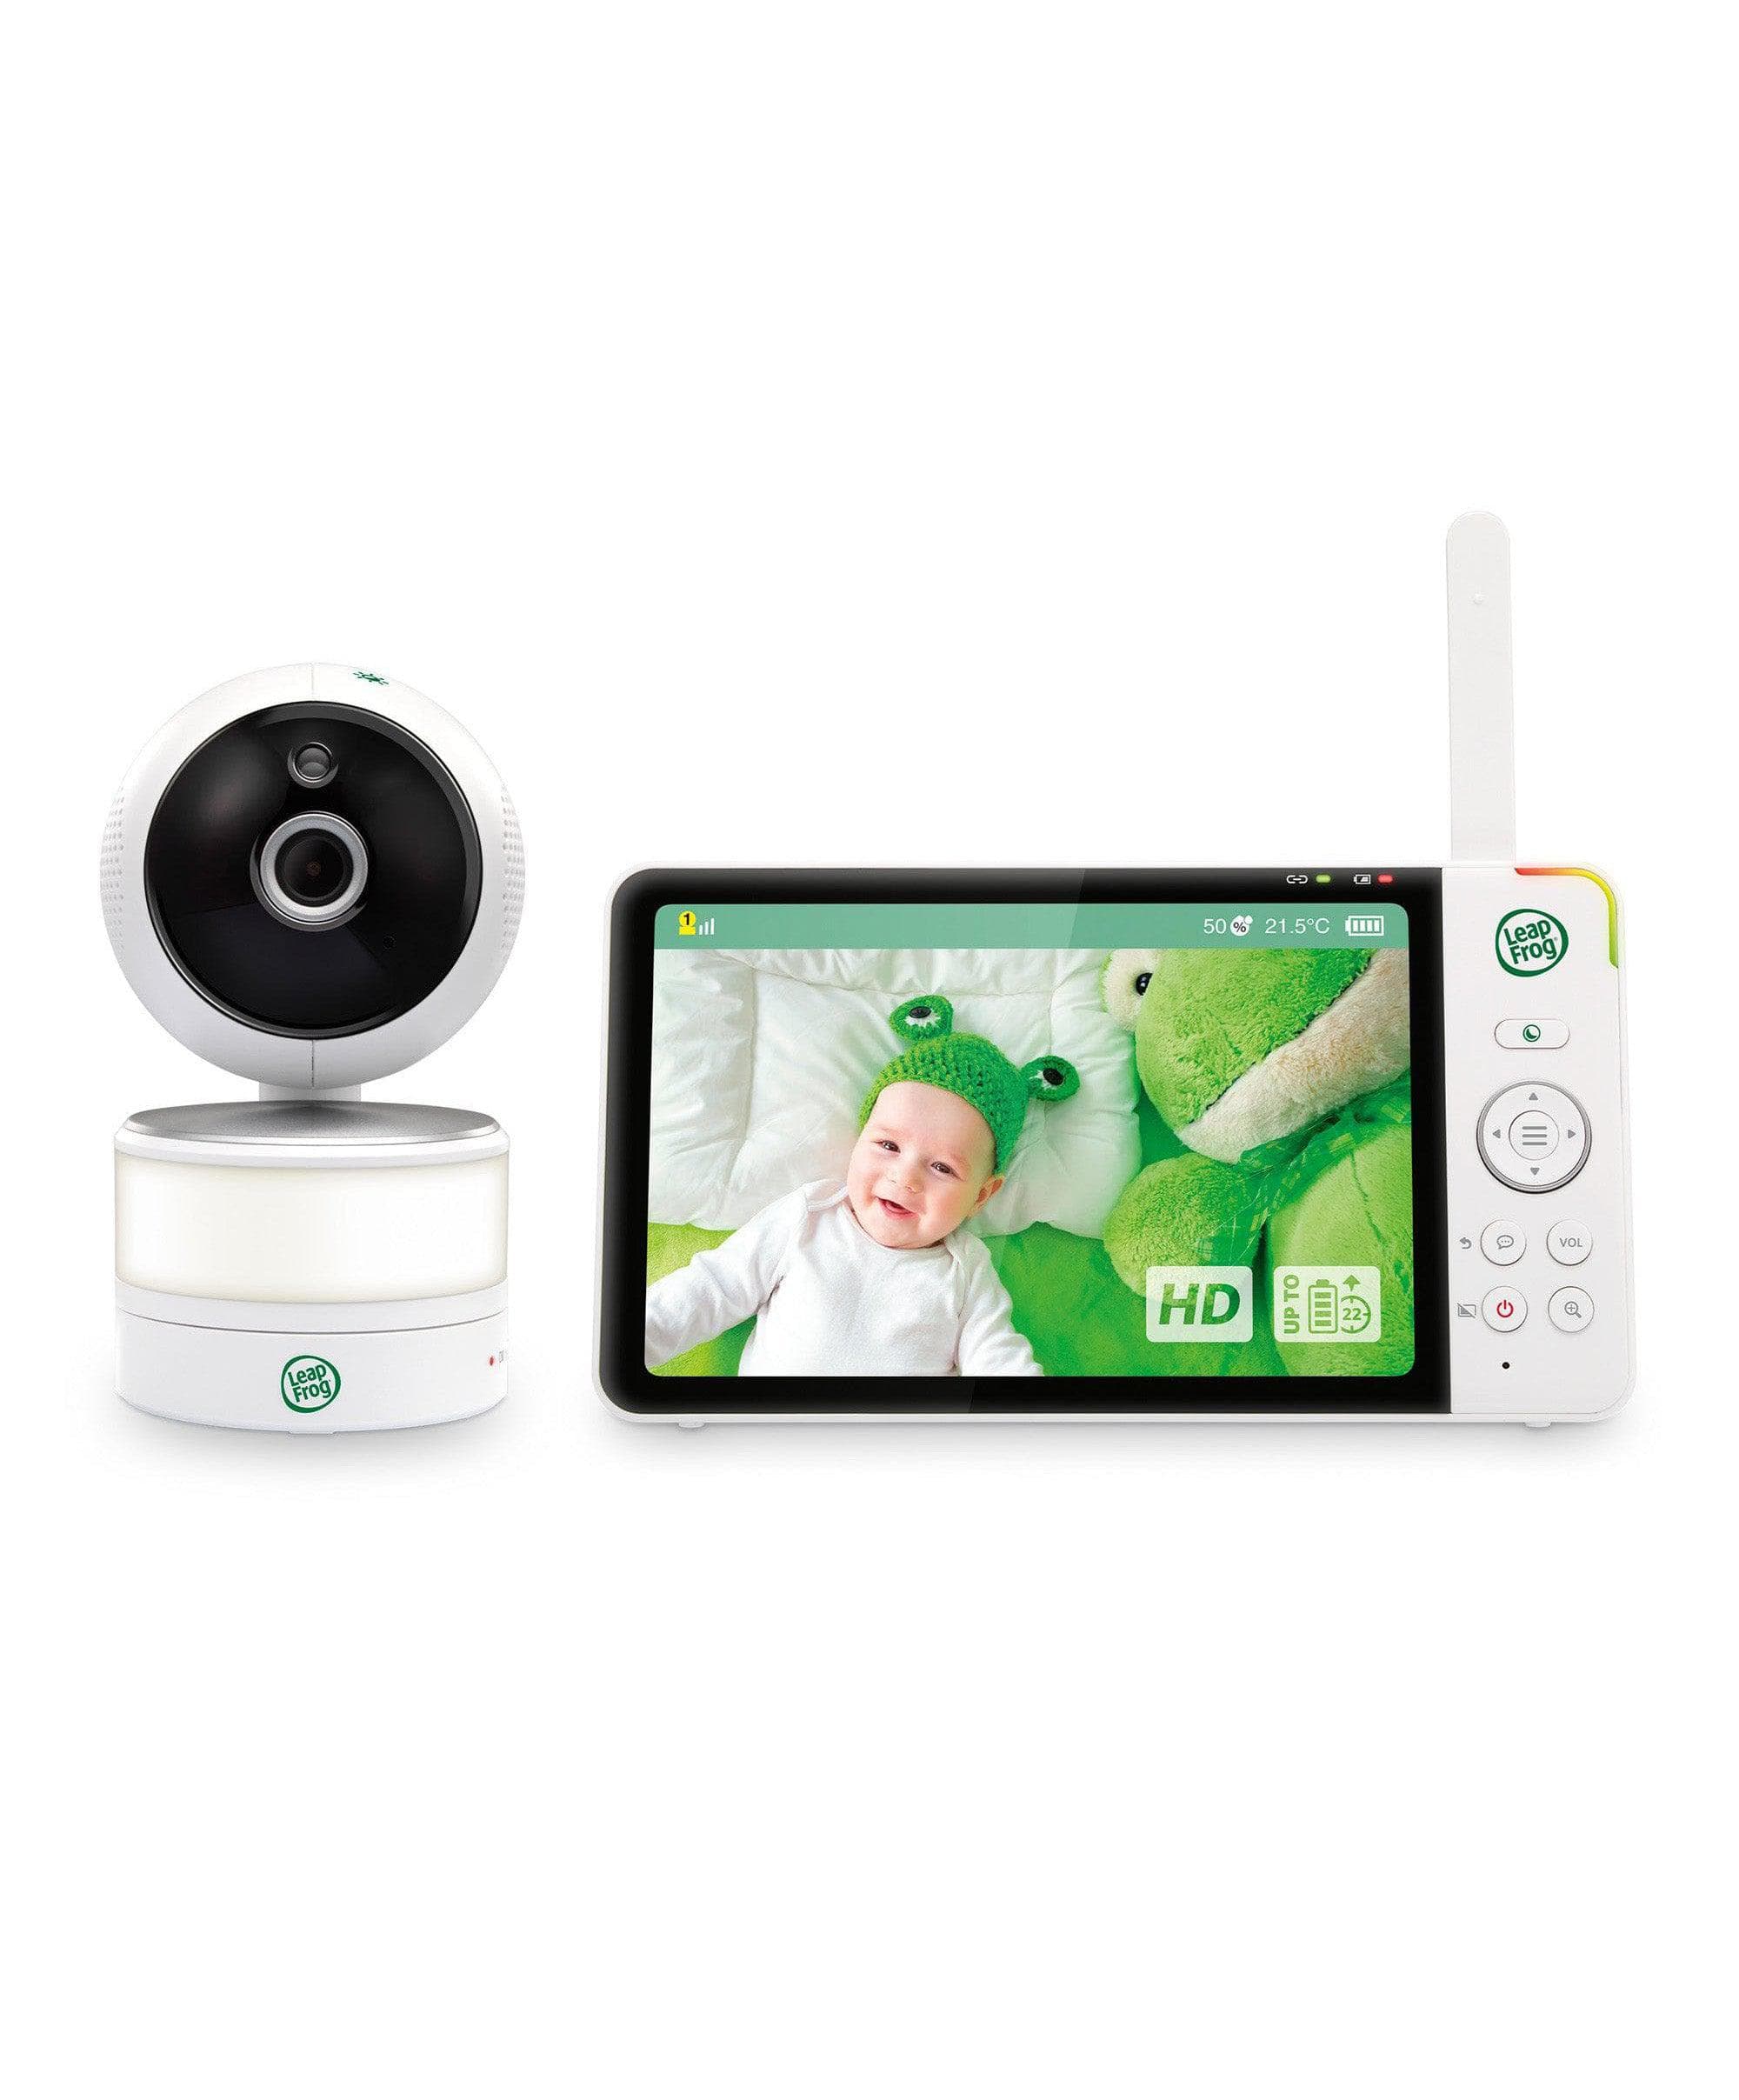 Angelcare AC327 Baby Monitor Review